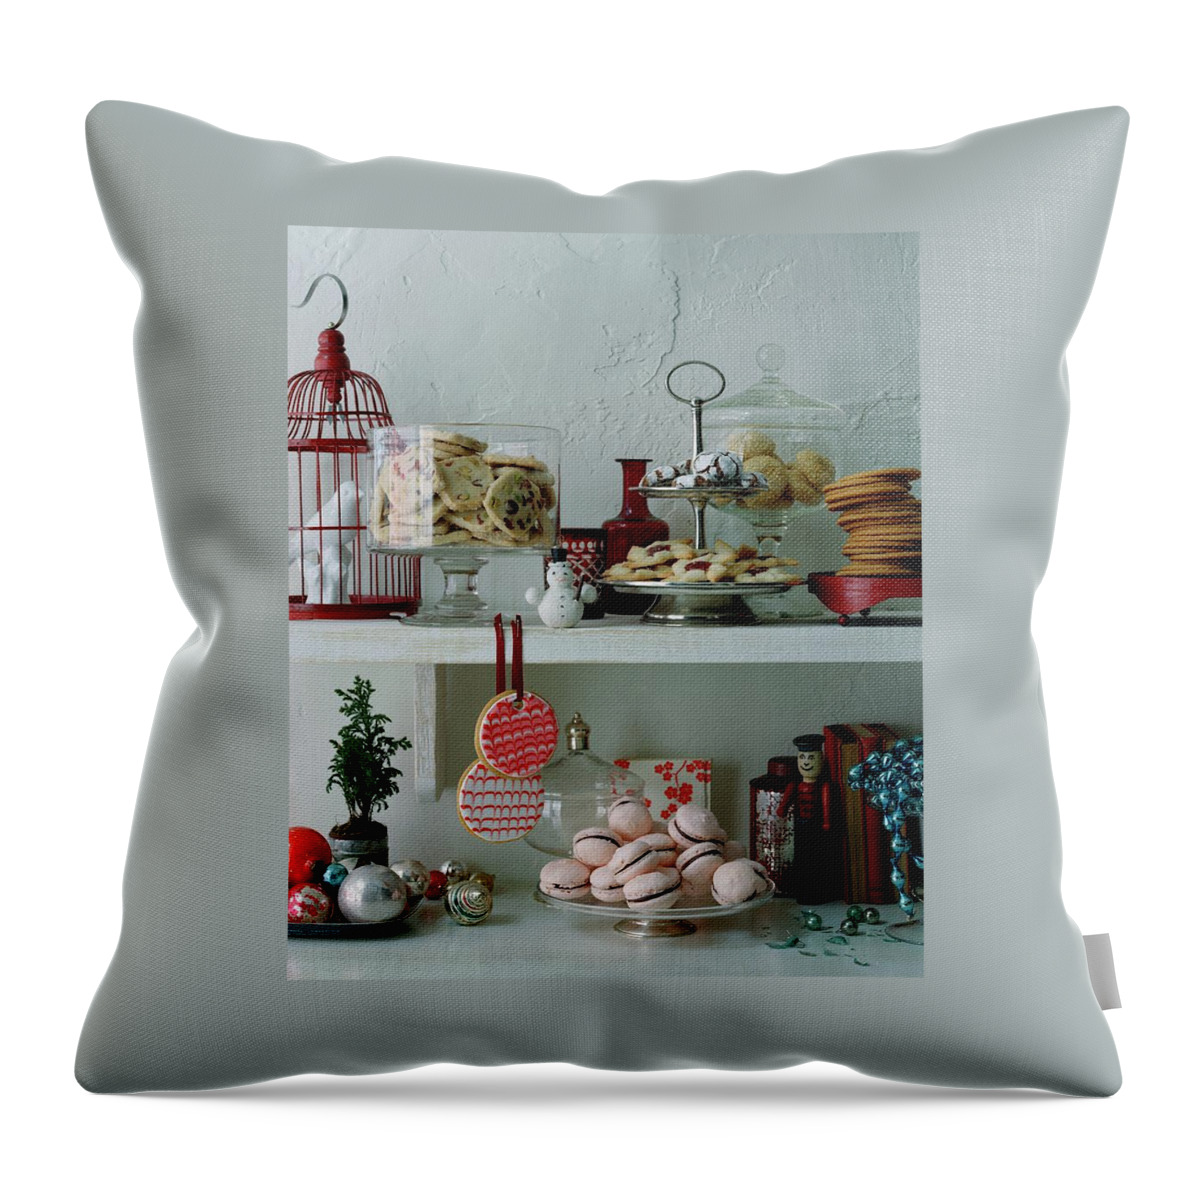 Christmas Cookies And Ornaments Throw Pillow